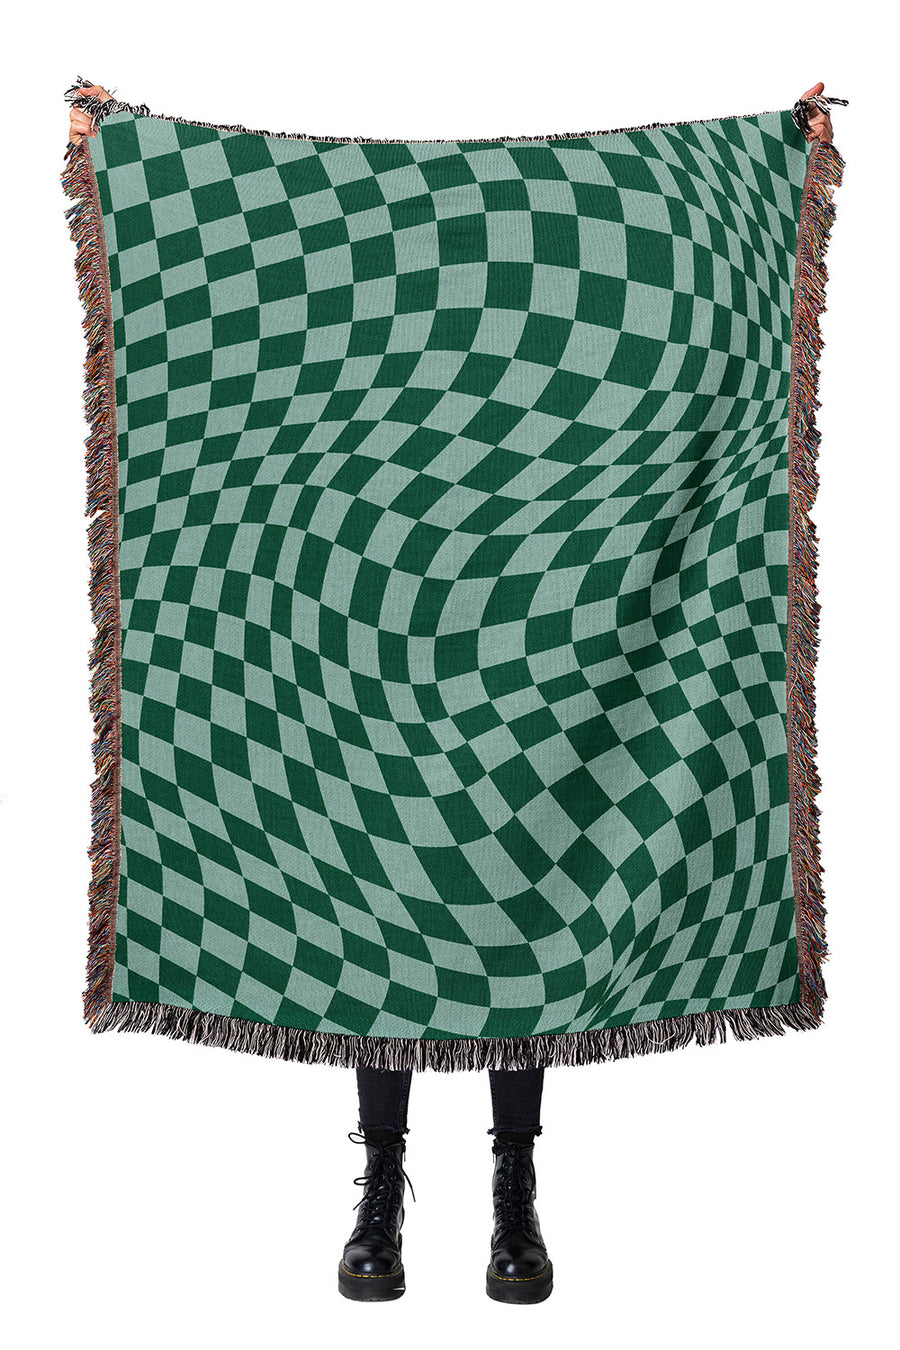 Trippy Checkers Green Cotton Woven Throw Blanket with a psychedelic checker pattern and fringe edges.